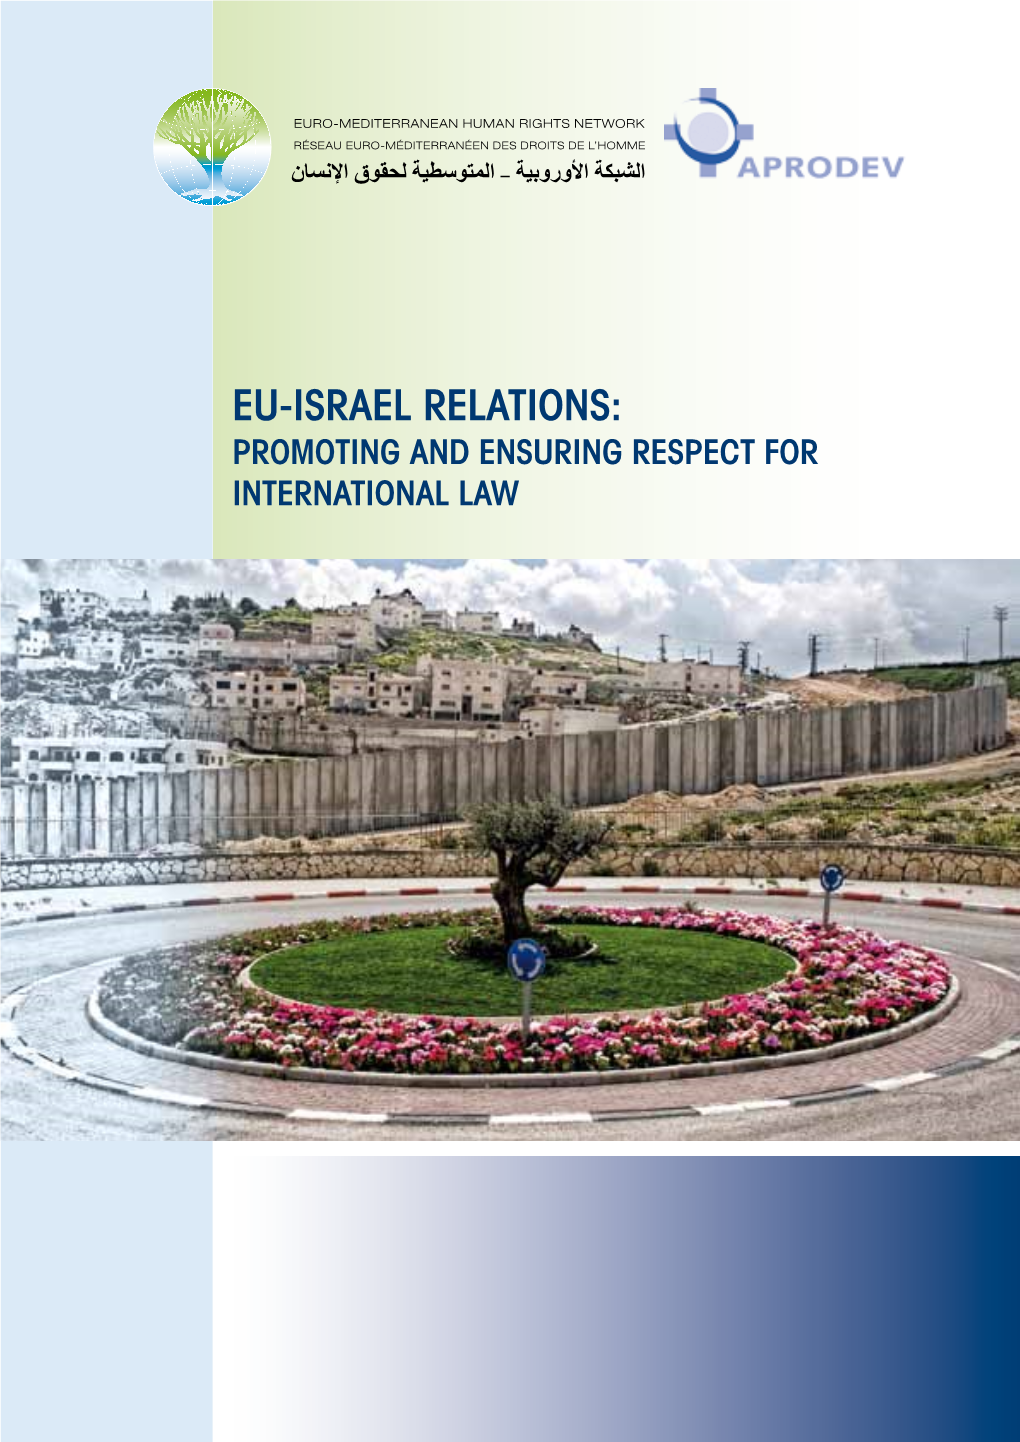 Eu-Israel Relations: Promoting and Ensuring Respect for International Law